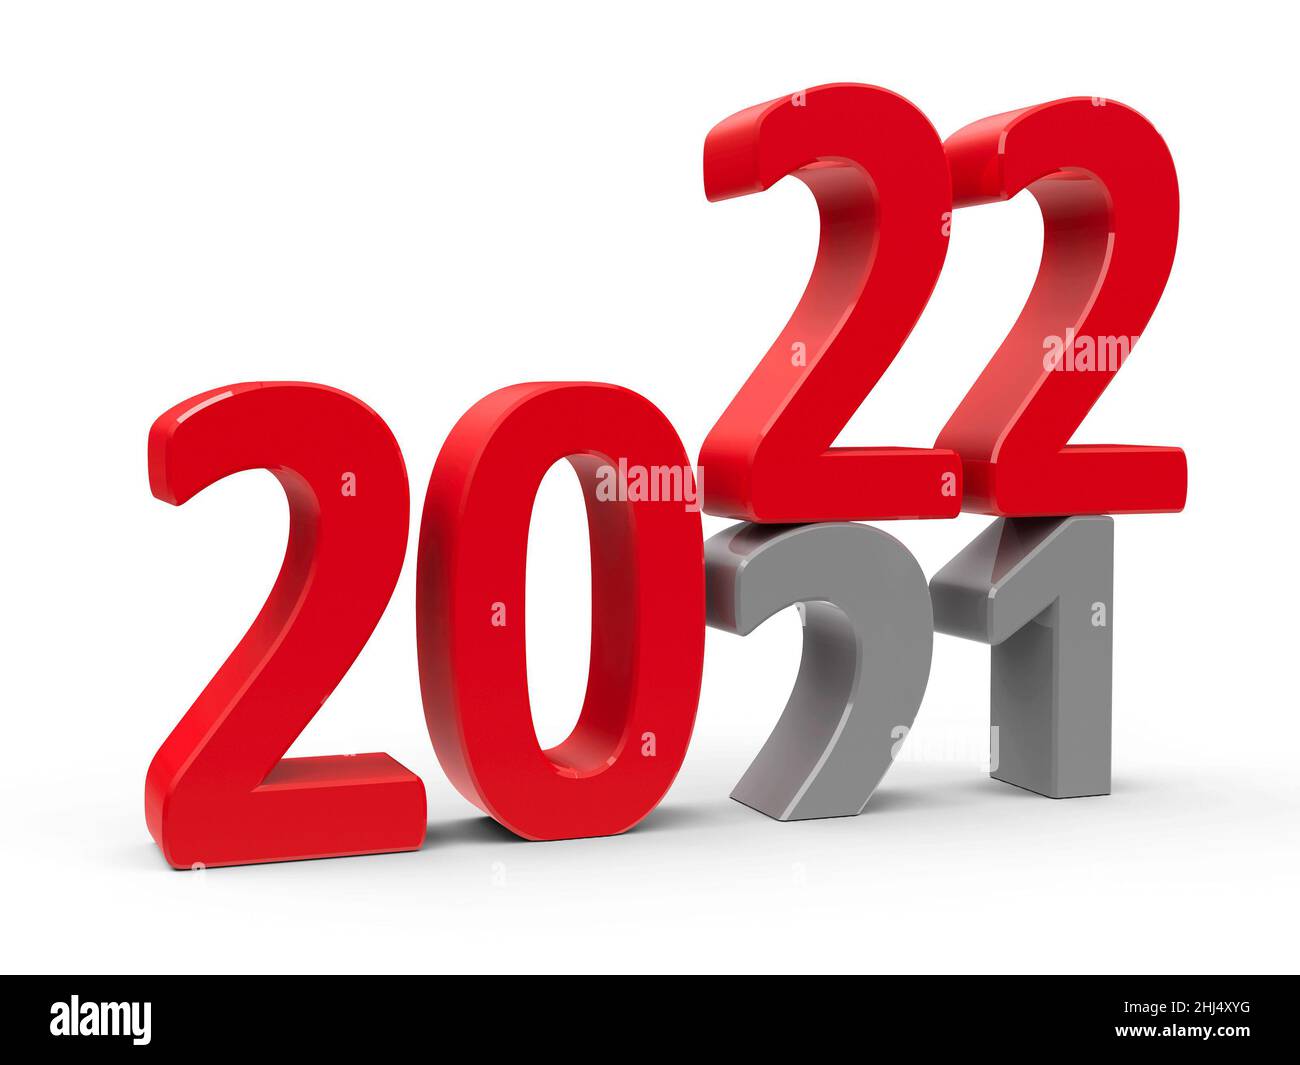 2021-2022 change represents the new year 2022, three-dimensional rendering, 3D illustration Stock Photo